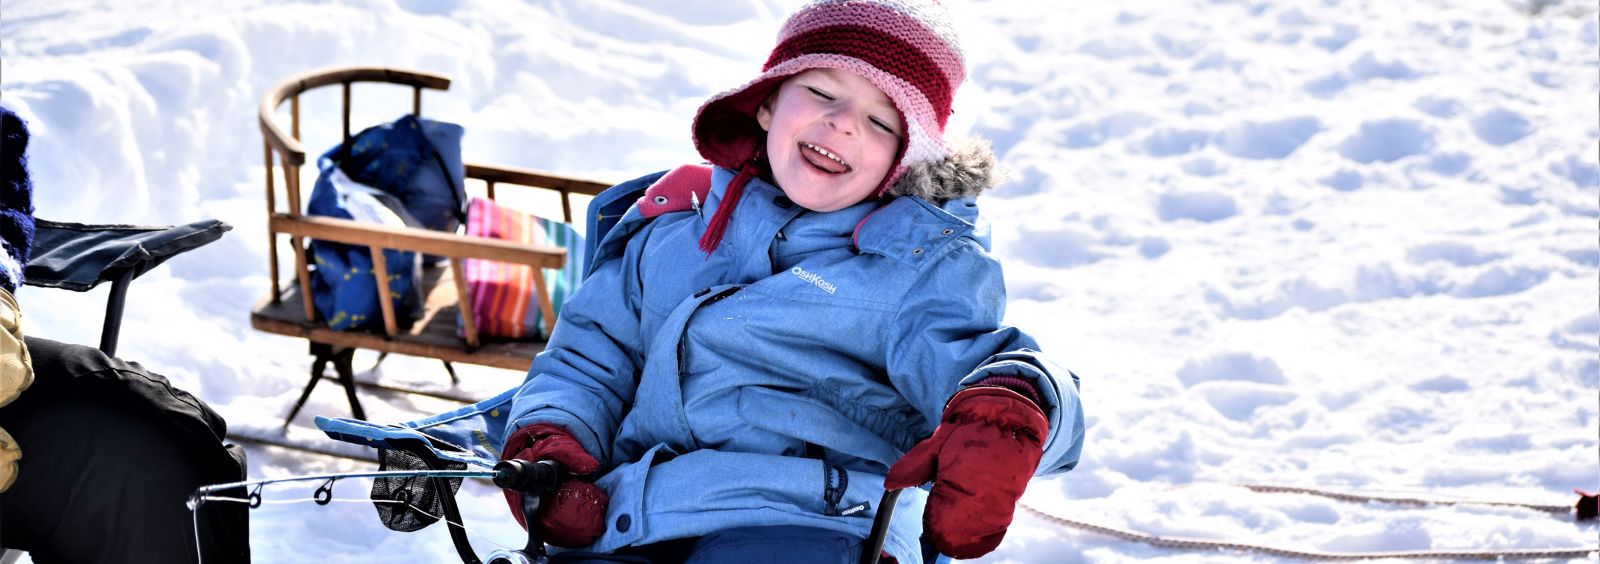 A young child laughing while ice fishing on the Ottawa River.